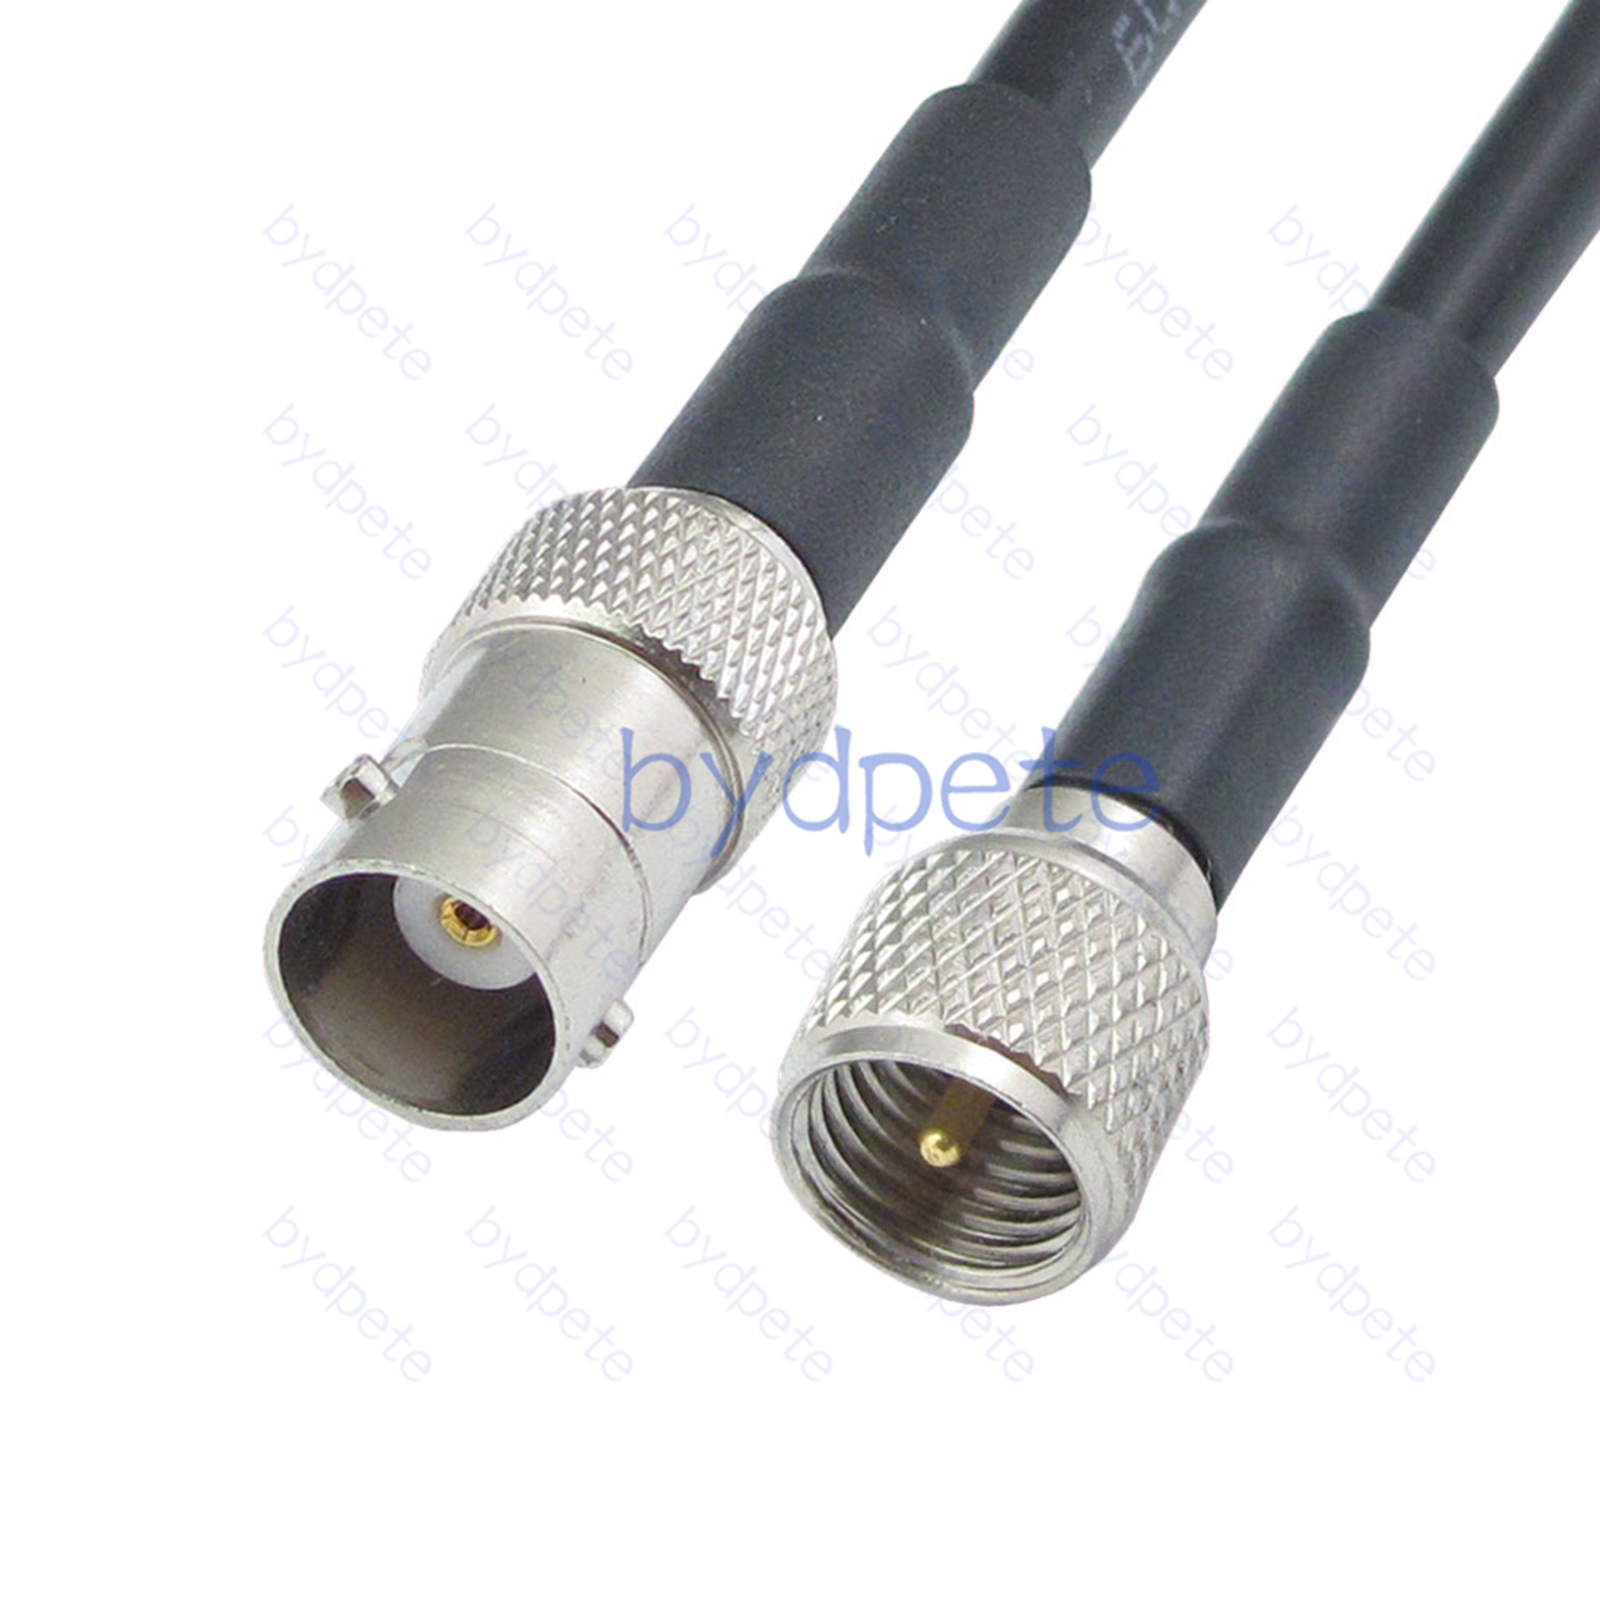 BNC Female to Mini UHF Male RG58 Coaxial Cable 50ohms Coax Koaxial Kable bydpete BYDC074BNC58SM